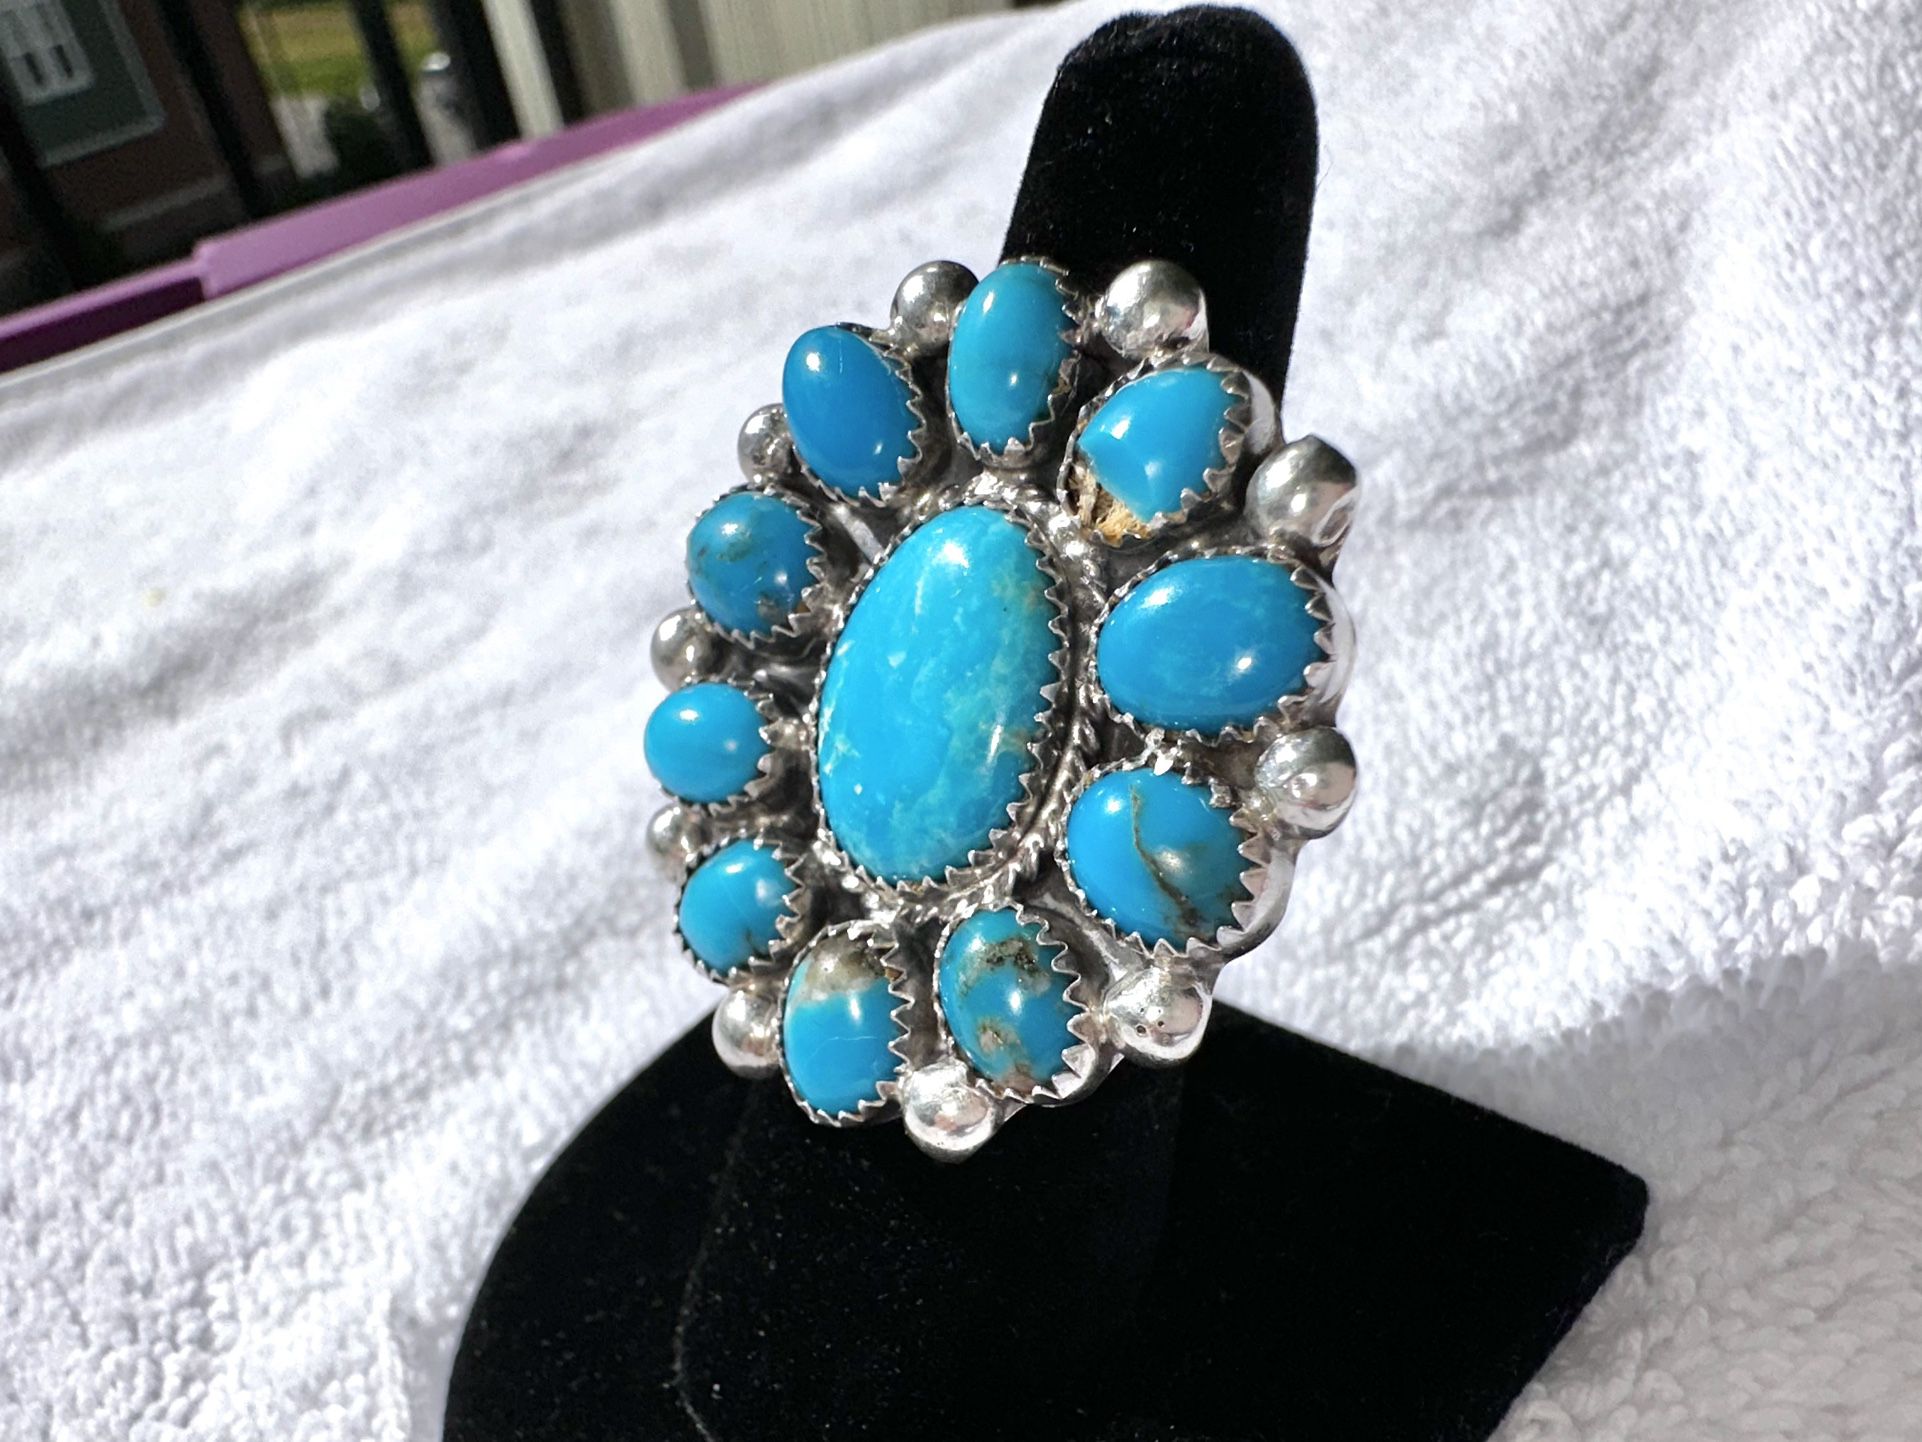 Bundle Two Turquoise, Navajo Rings, And One Soladite Statement Ring